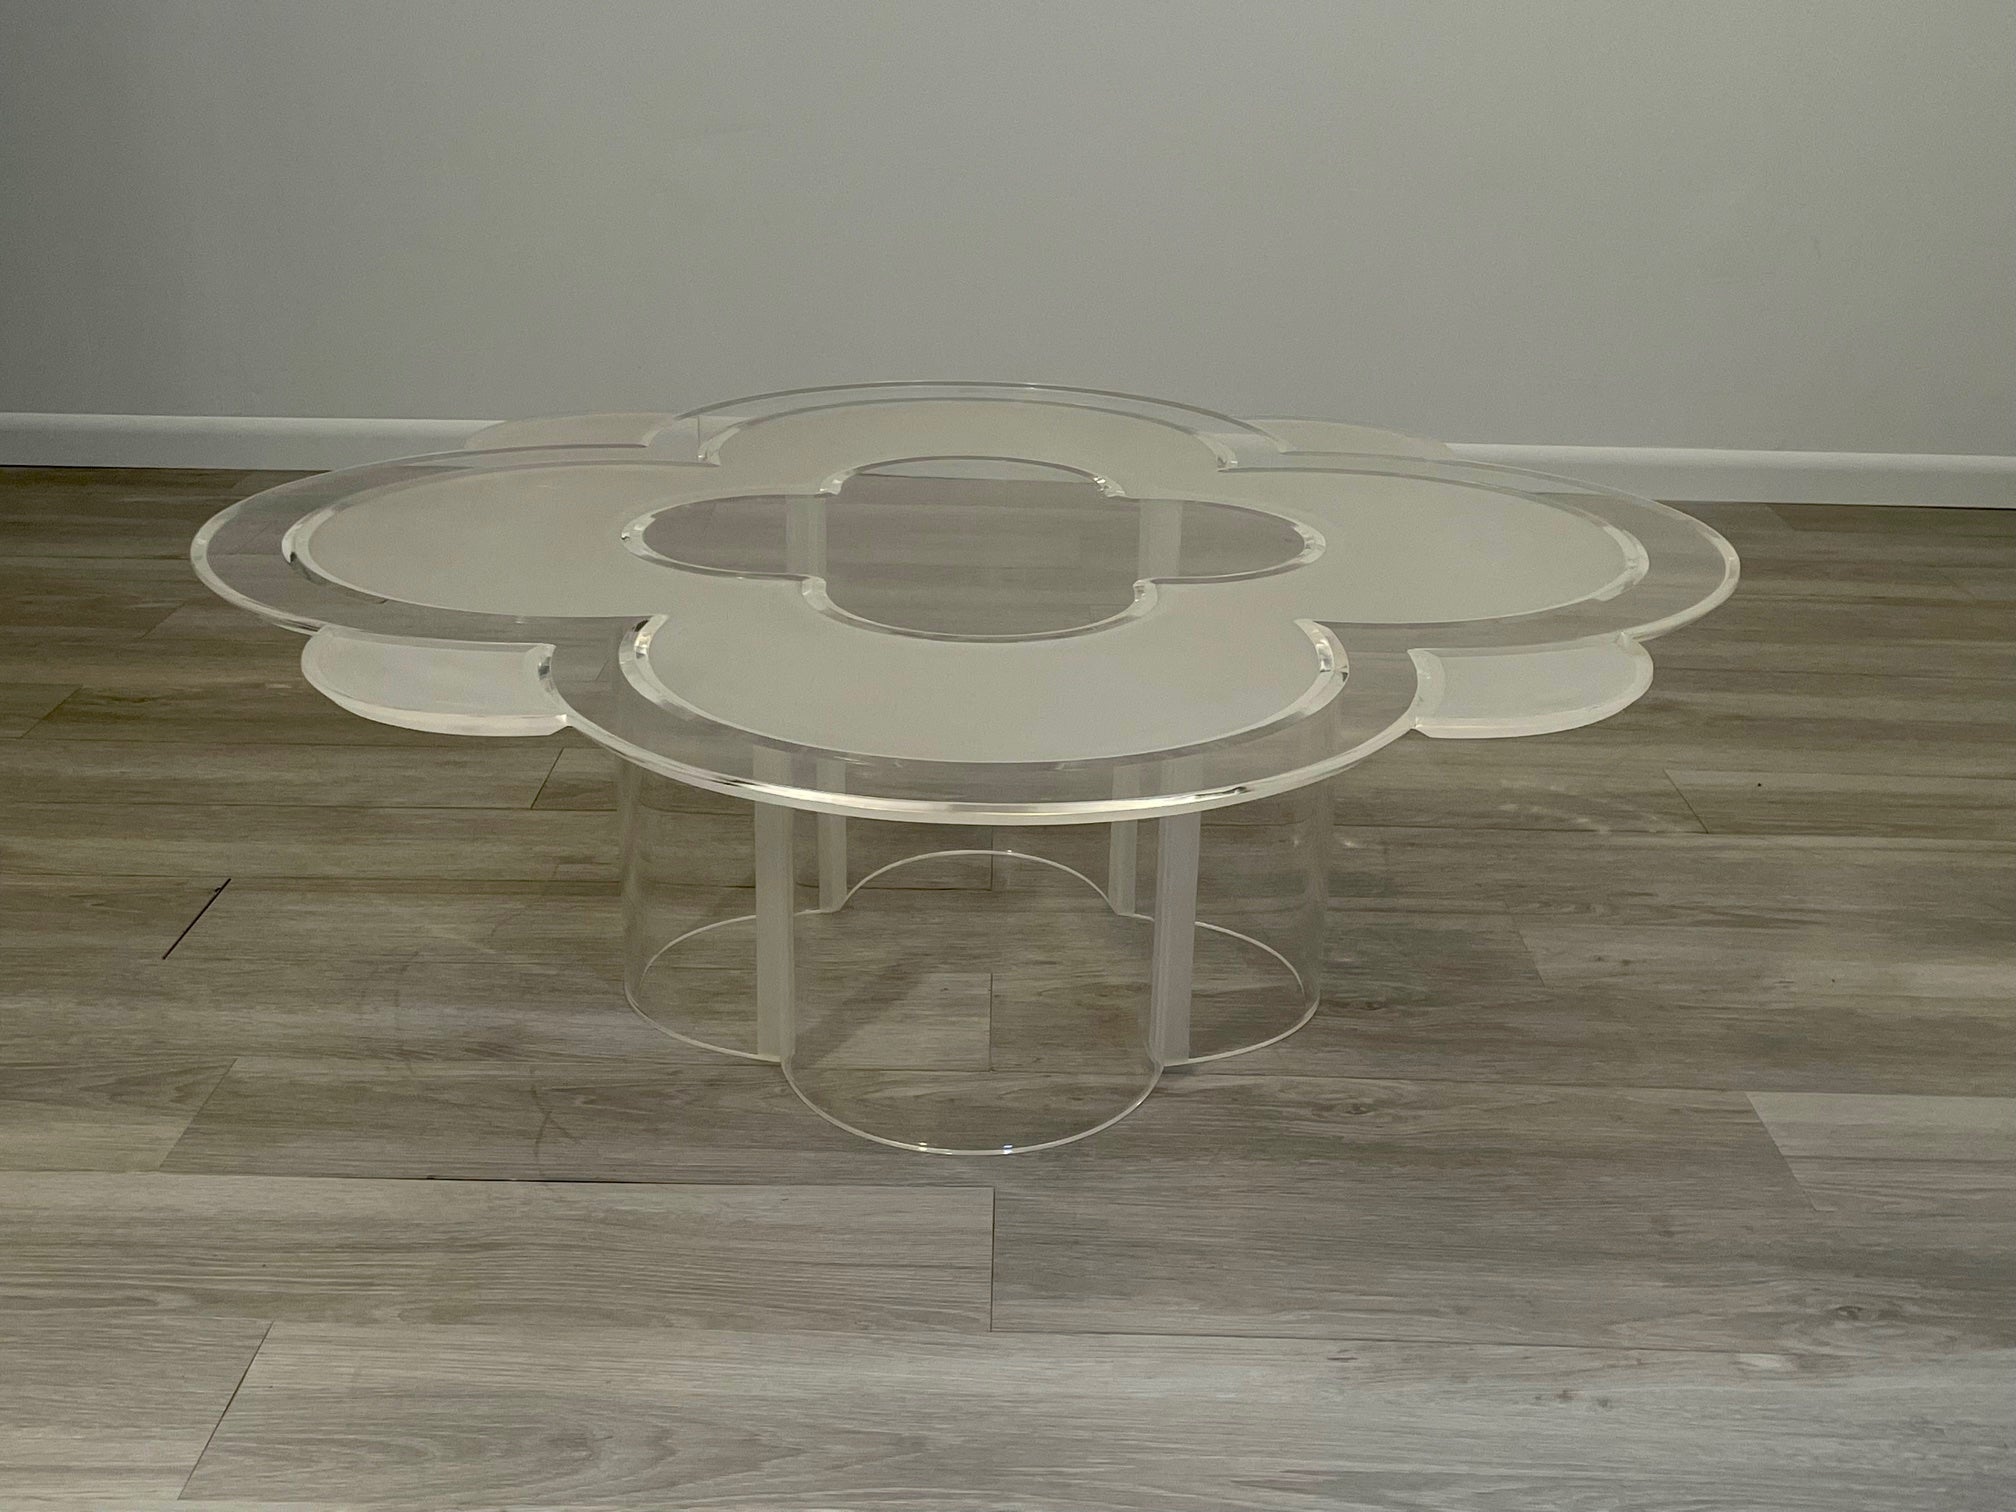 We've never seen another one like this memorable camelia flower shaped lucite coffee table having a mix of frosted and clear lucite, scalloped edges and sculptural shaped base. Reminds us of the camelia flower often seen in Chanel necklaces. So